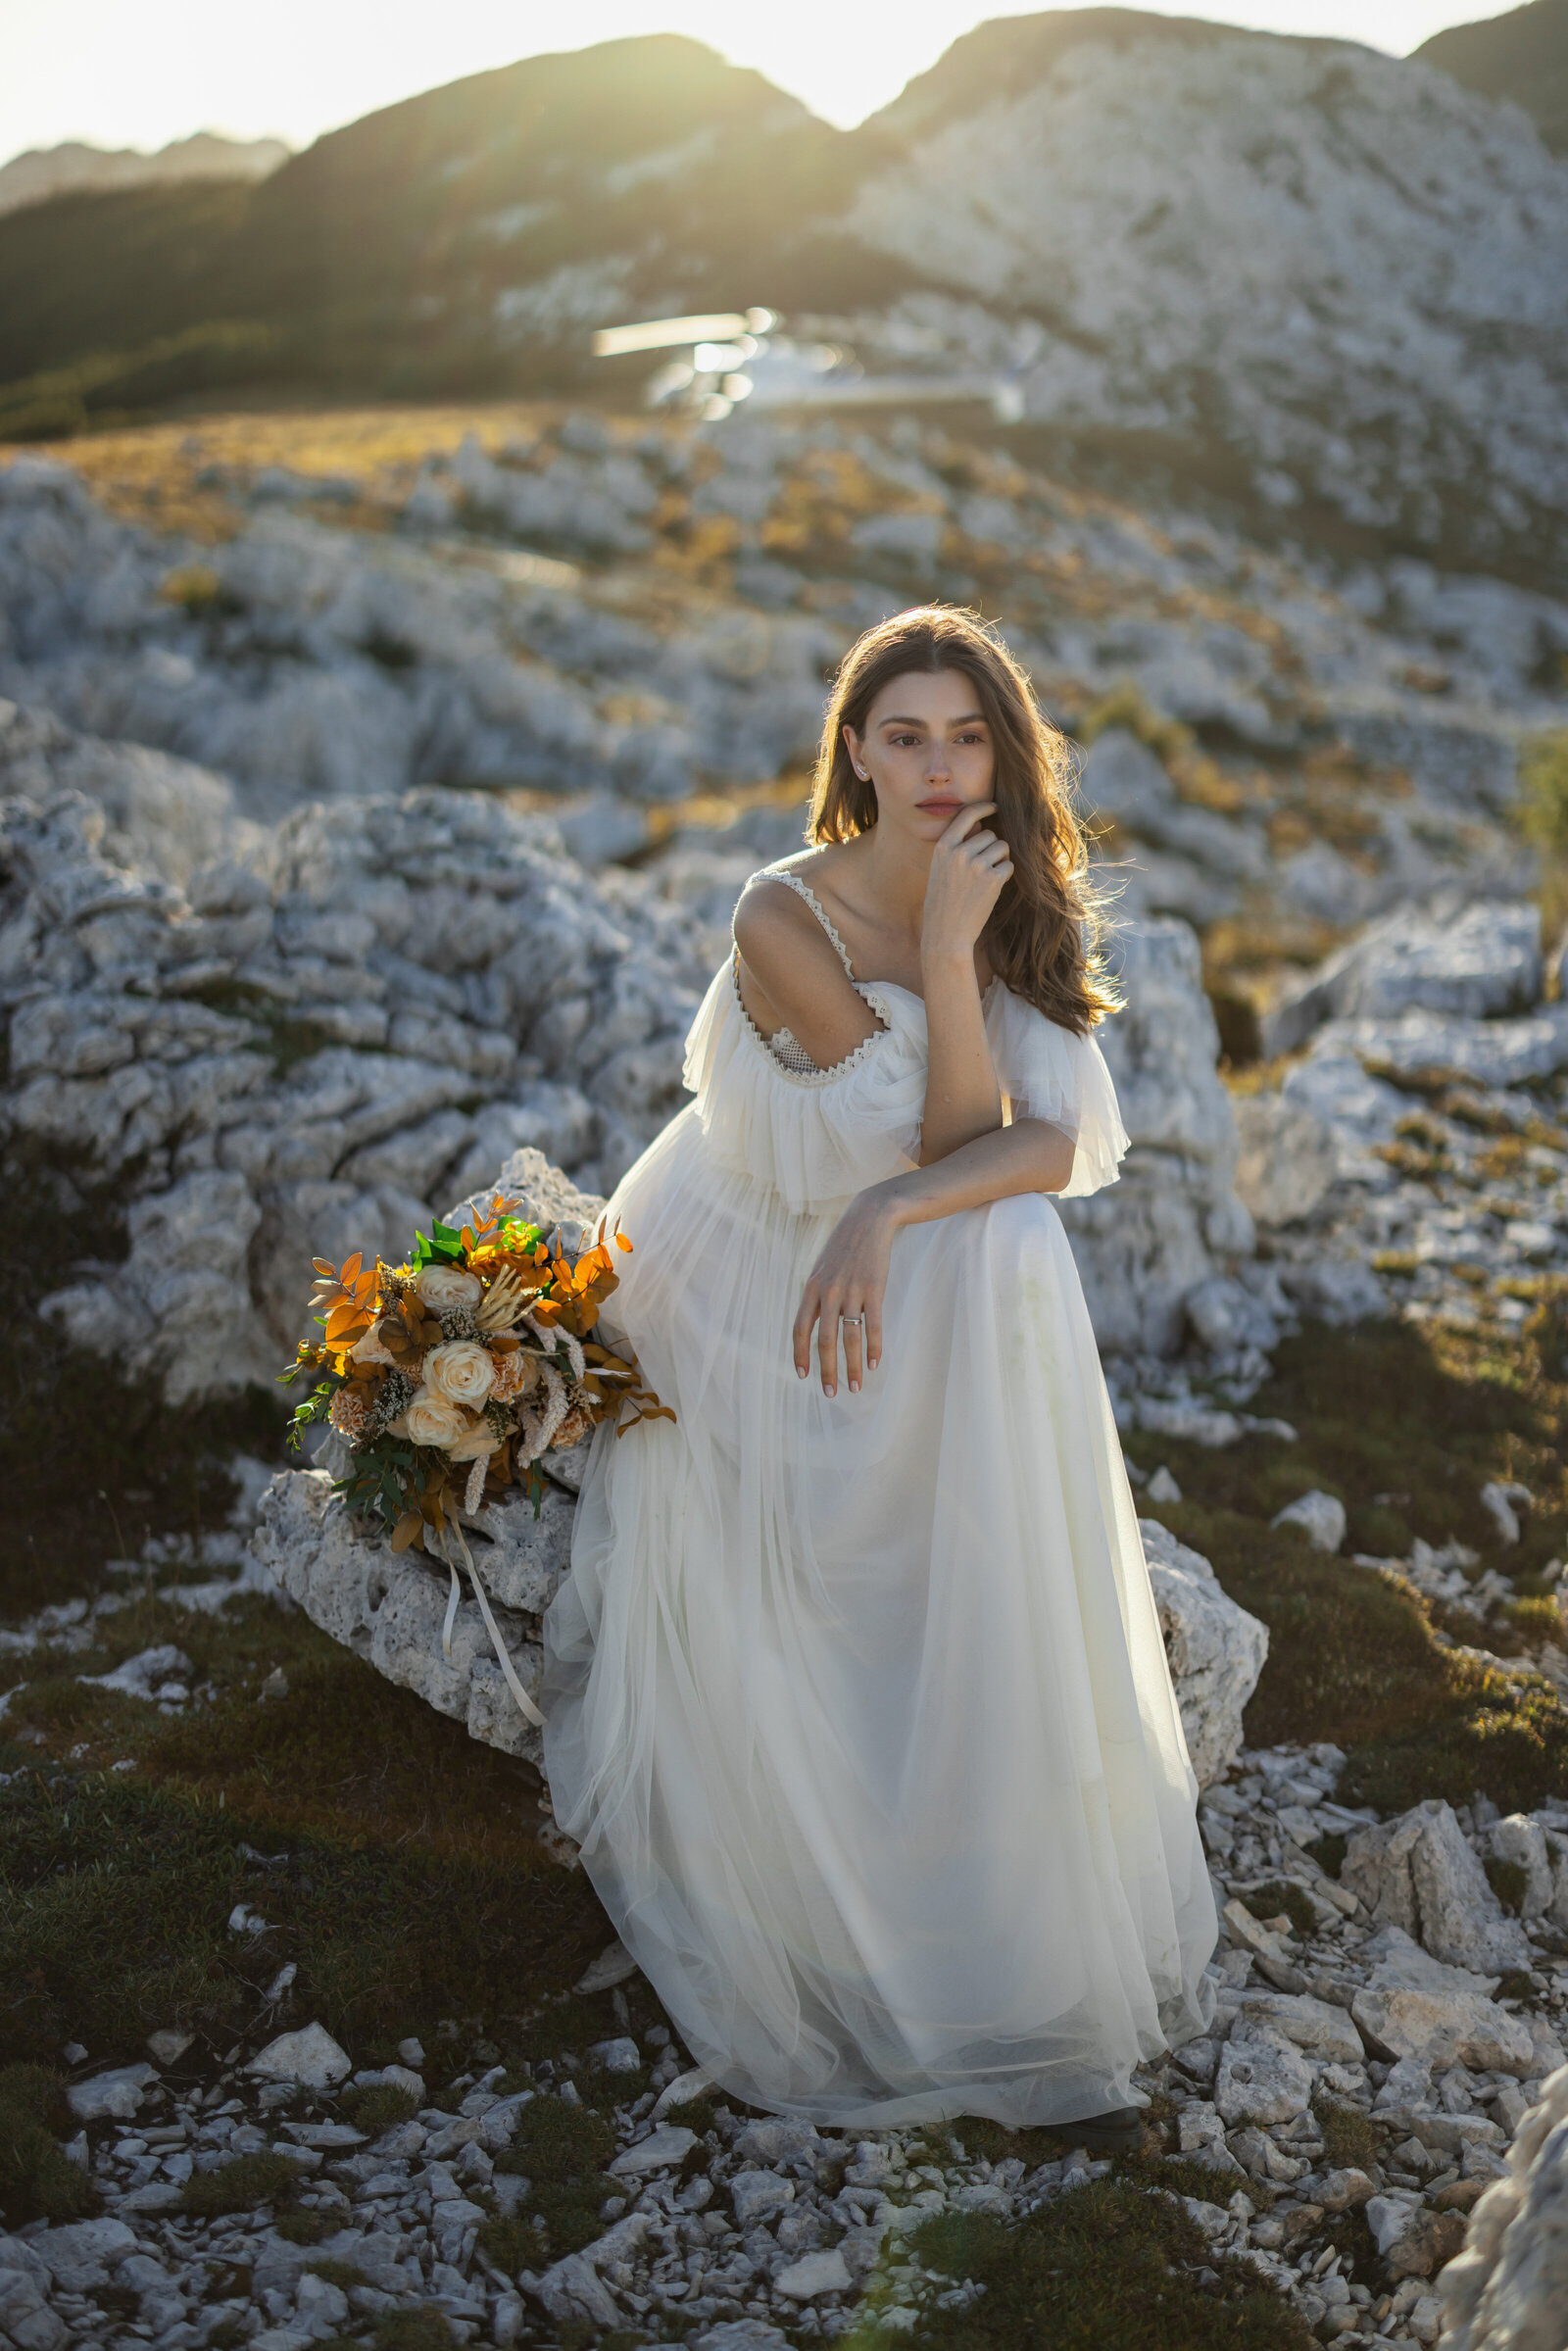 Elopement photos in the Dolomites, Italy. Photos taken by Kollar Photography, Italy Elopement Photographer